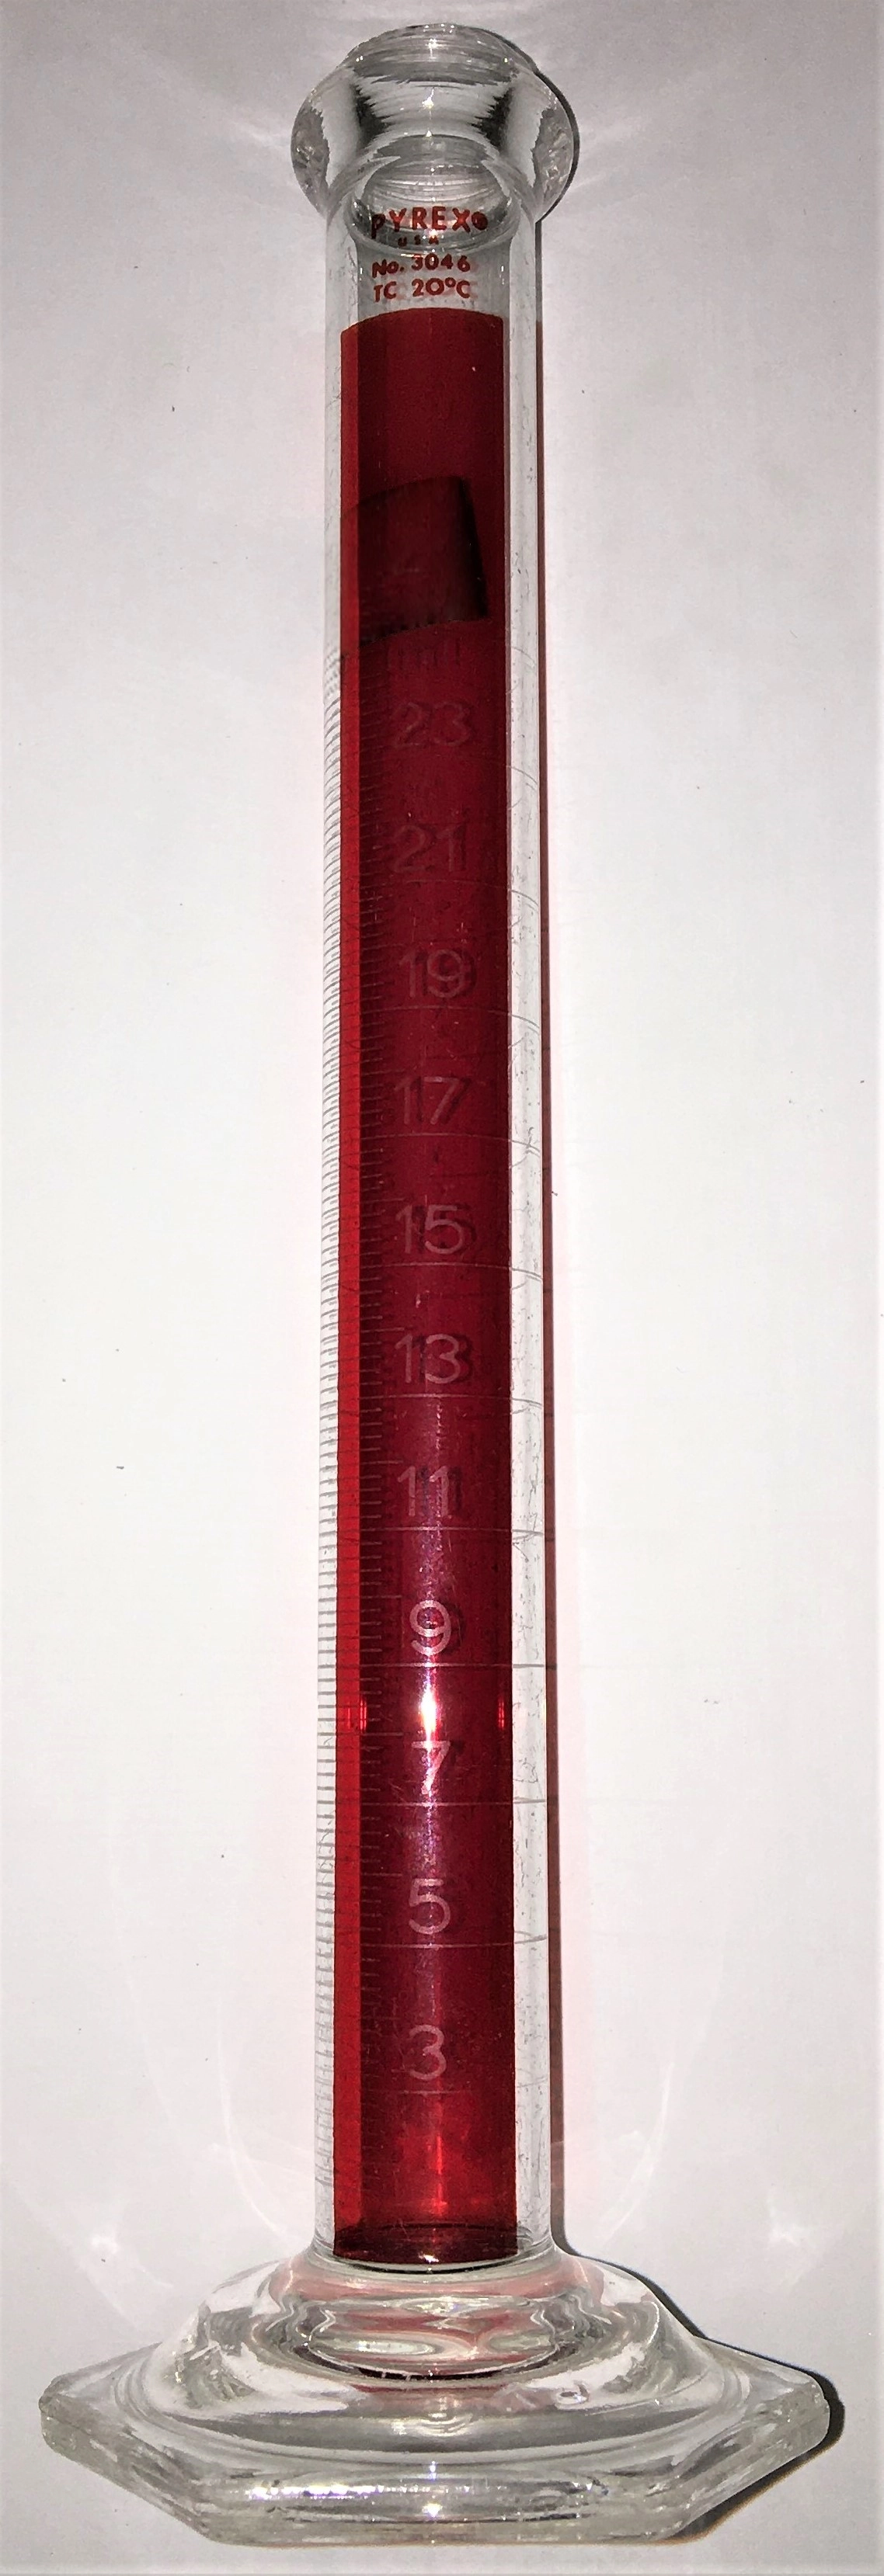 Corning PYREX 3046-25 Lifetime Red Graduated Cylinder with Beaded Rim - 25mL